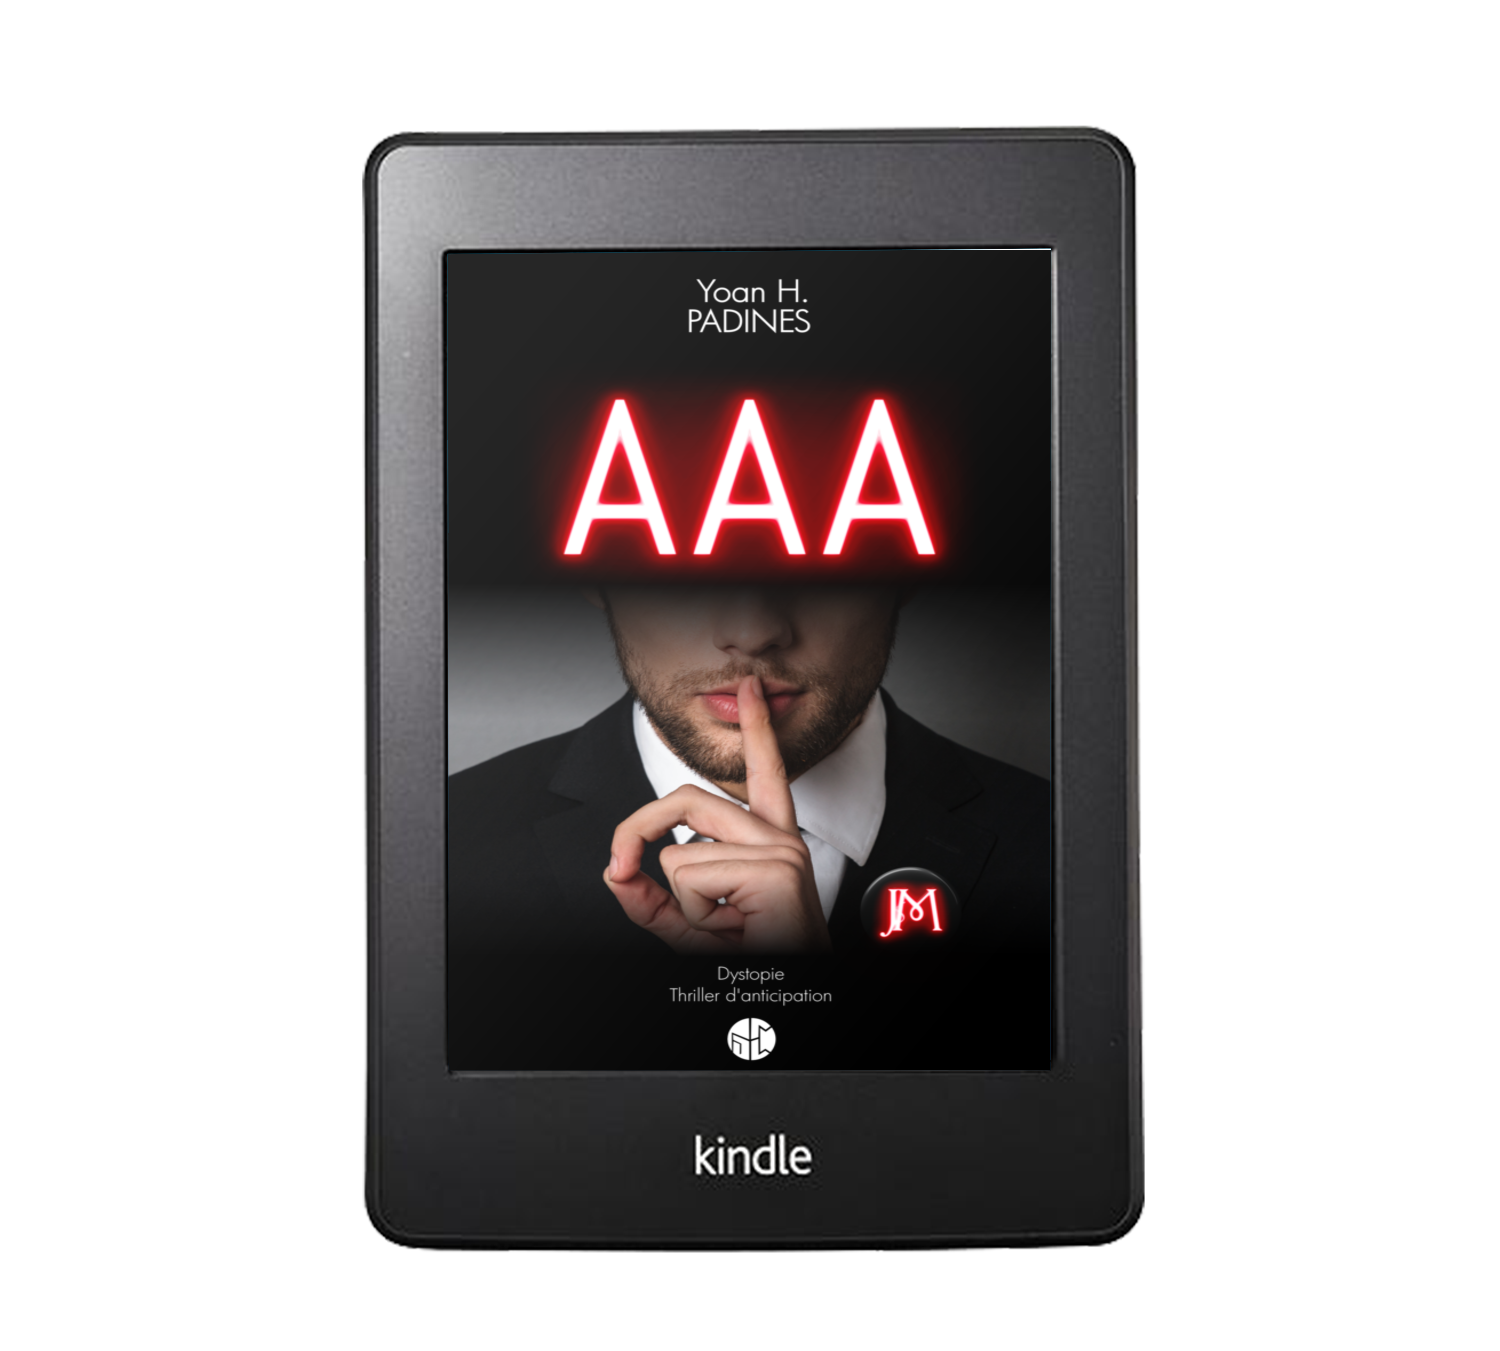 ebook AAA dystopie thriller anticipation yoan h padines